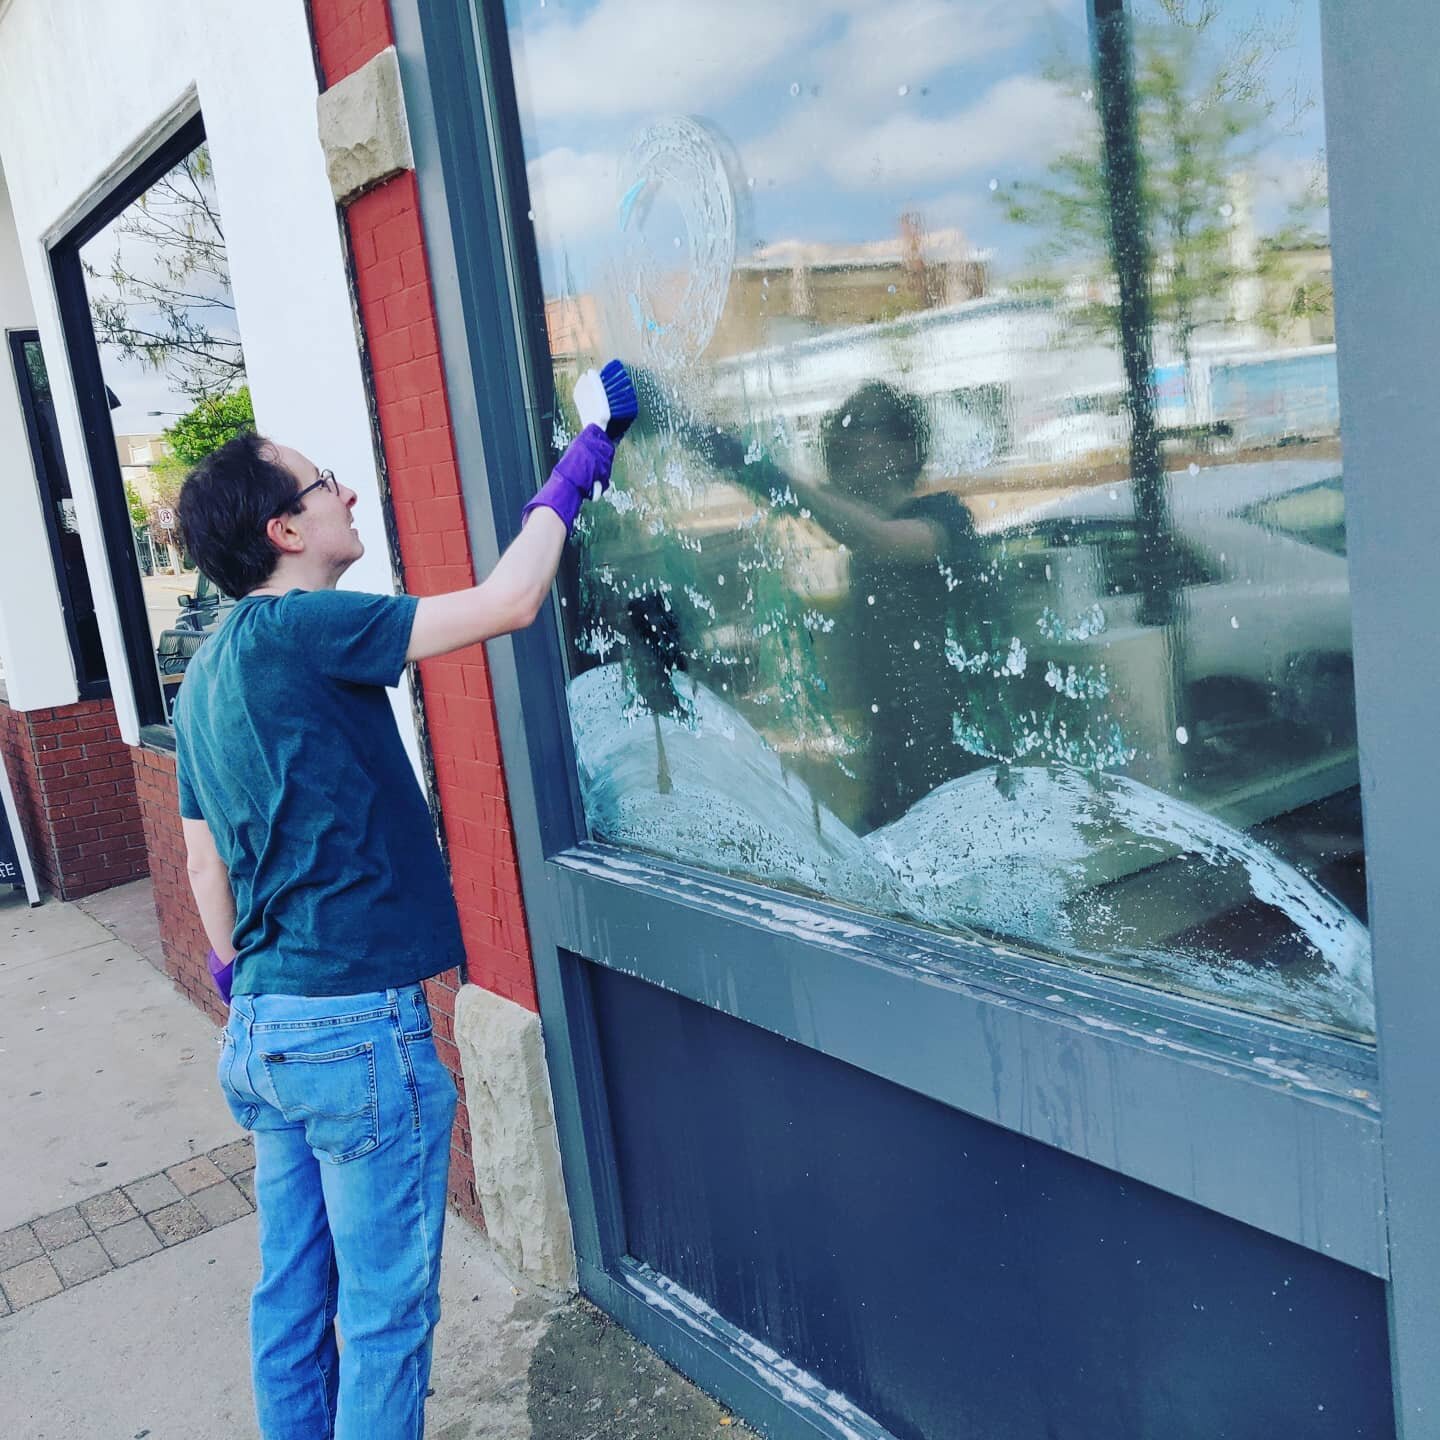 Scrub, scrape.  Time to take the winter scene off our windows. What should we put here next?